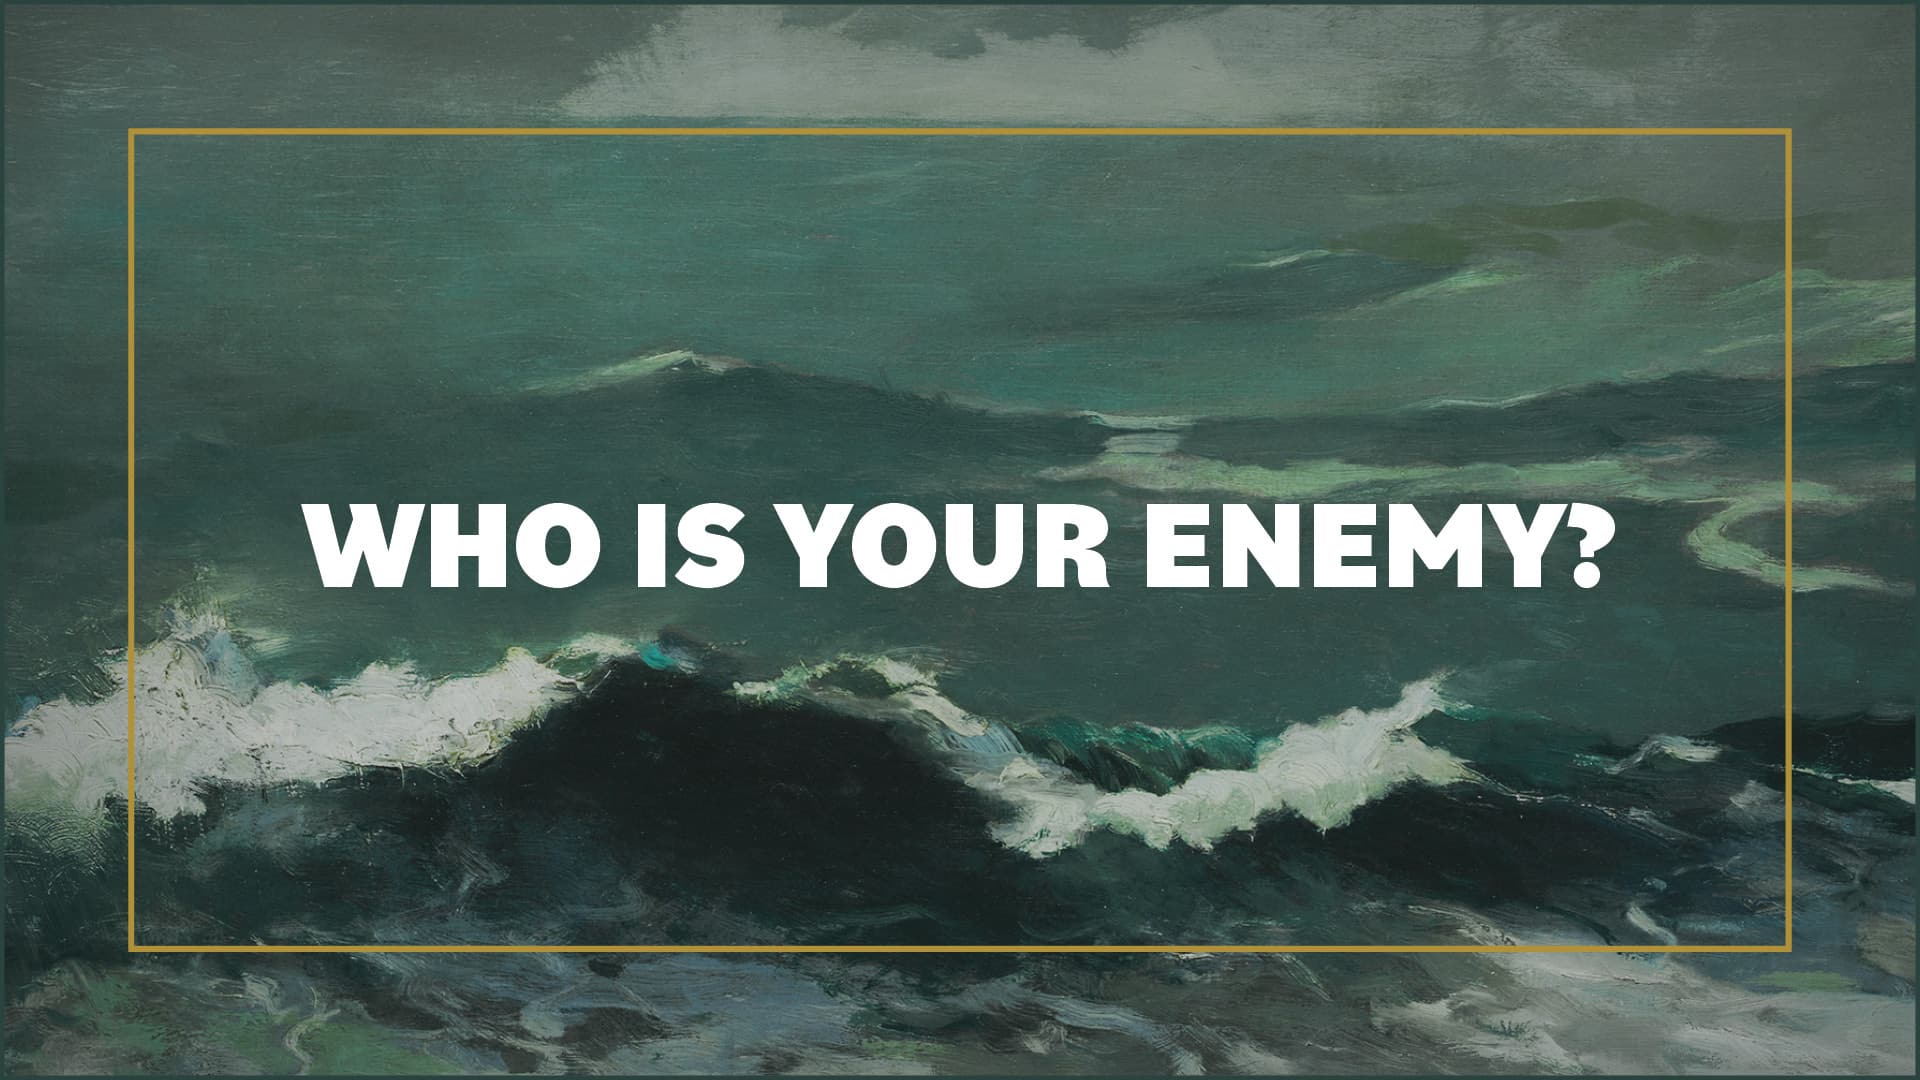 Who is your enemy?